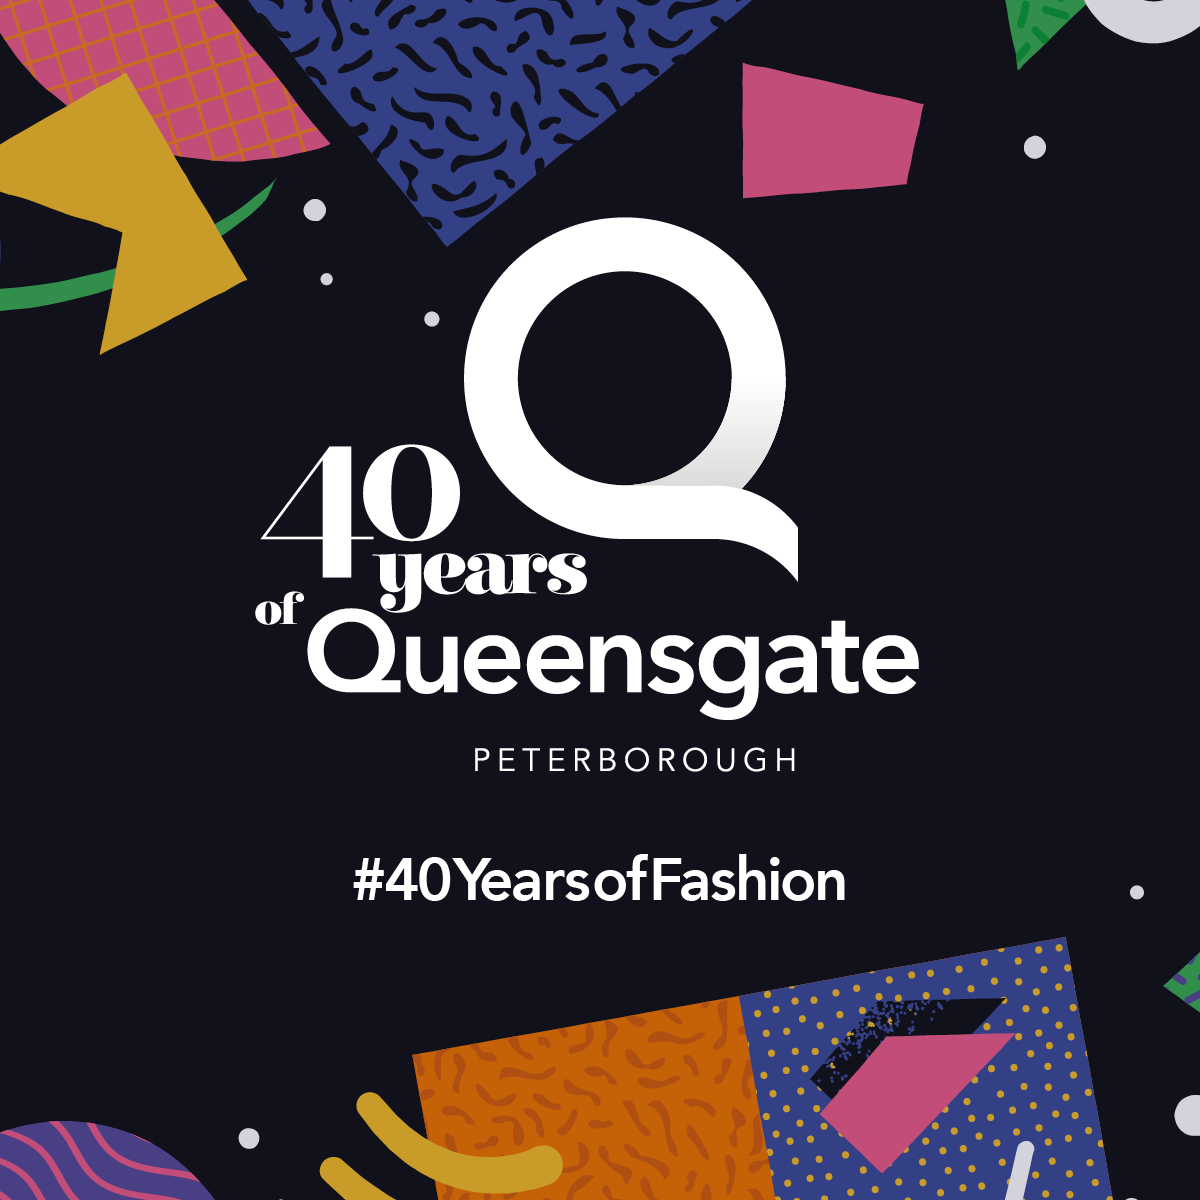 Enjoy more style this summer at our Fashion Through the Ages event taking place 9th & 10th July! 👗 Celebrate 4 decades of fabulous fashion, with rad retro selfies, fashion talks and tips, and fashion shows. We can't wait to share more exciting news soon! #40YearsofFashion